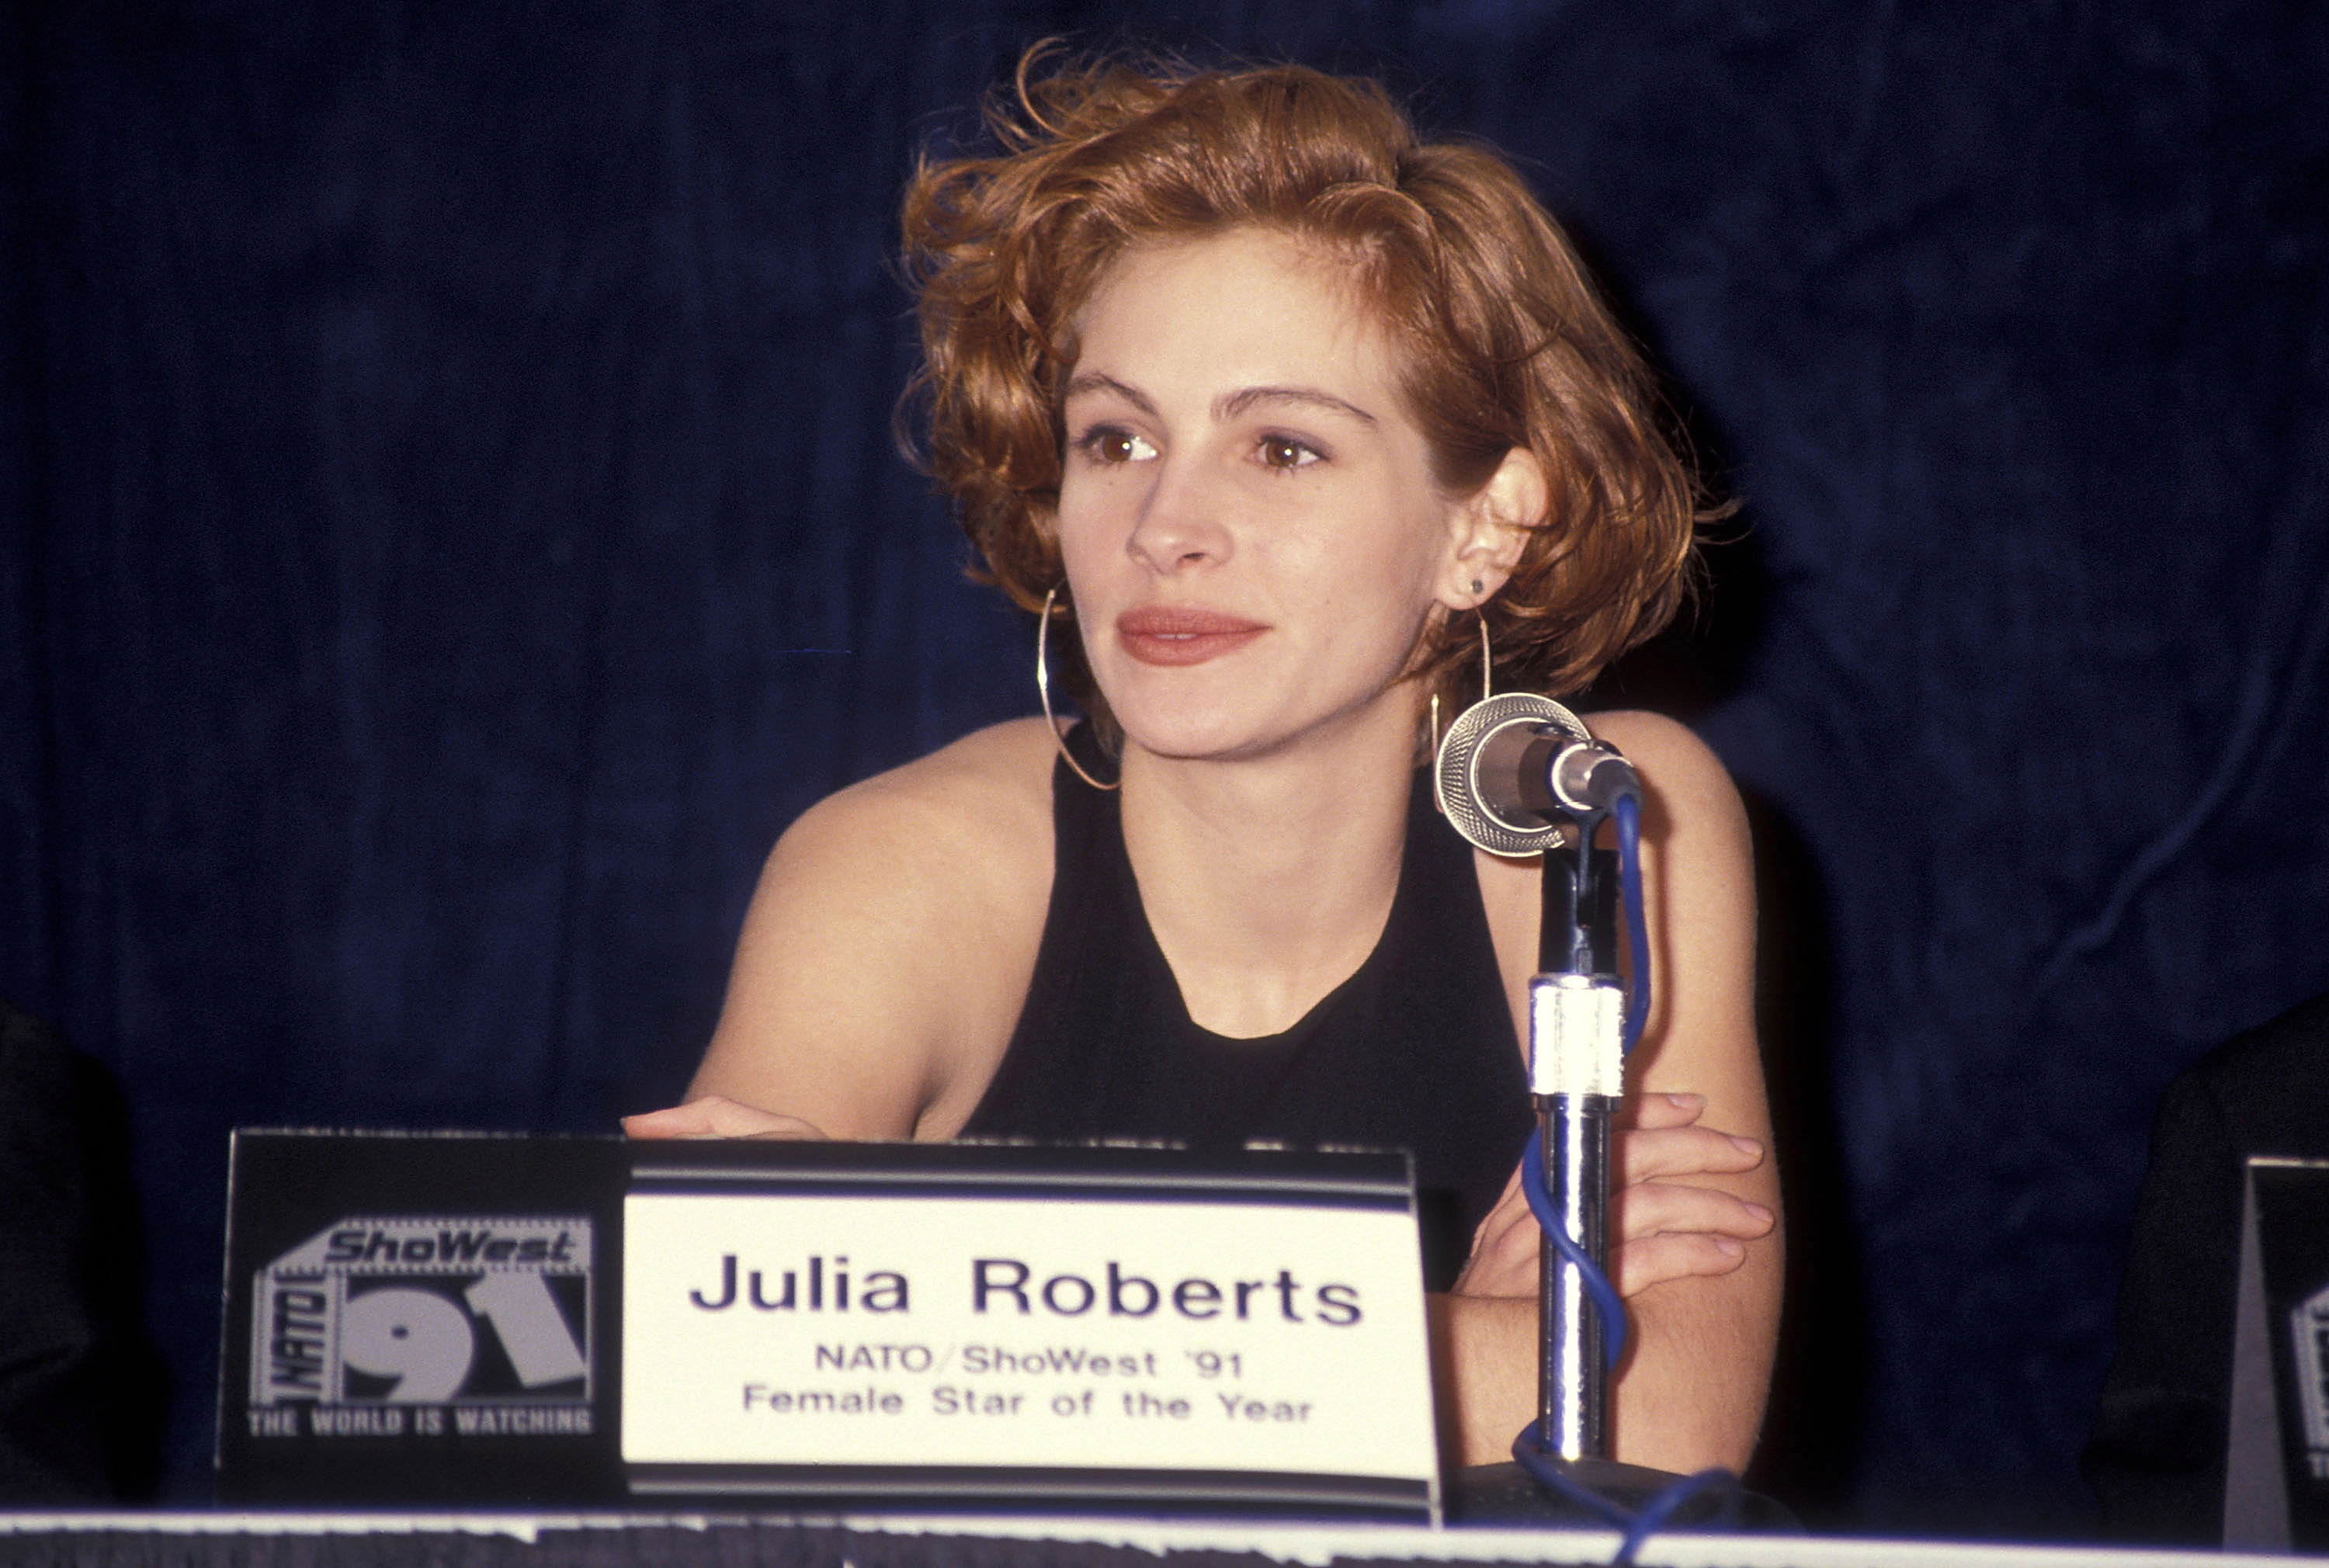 Julia Roberts at the NATO/ShoWest Convention in Las Vega991 | Source: Getty Images